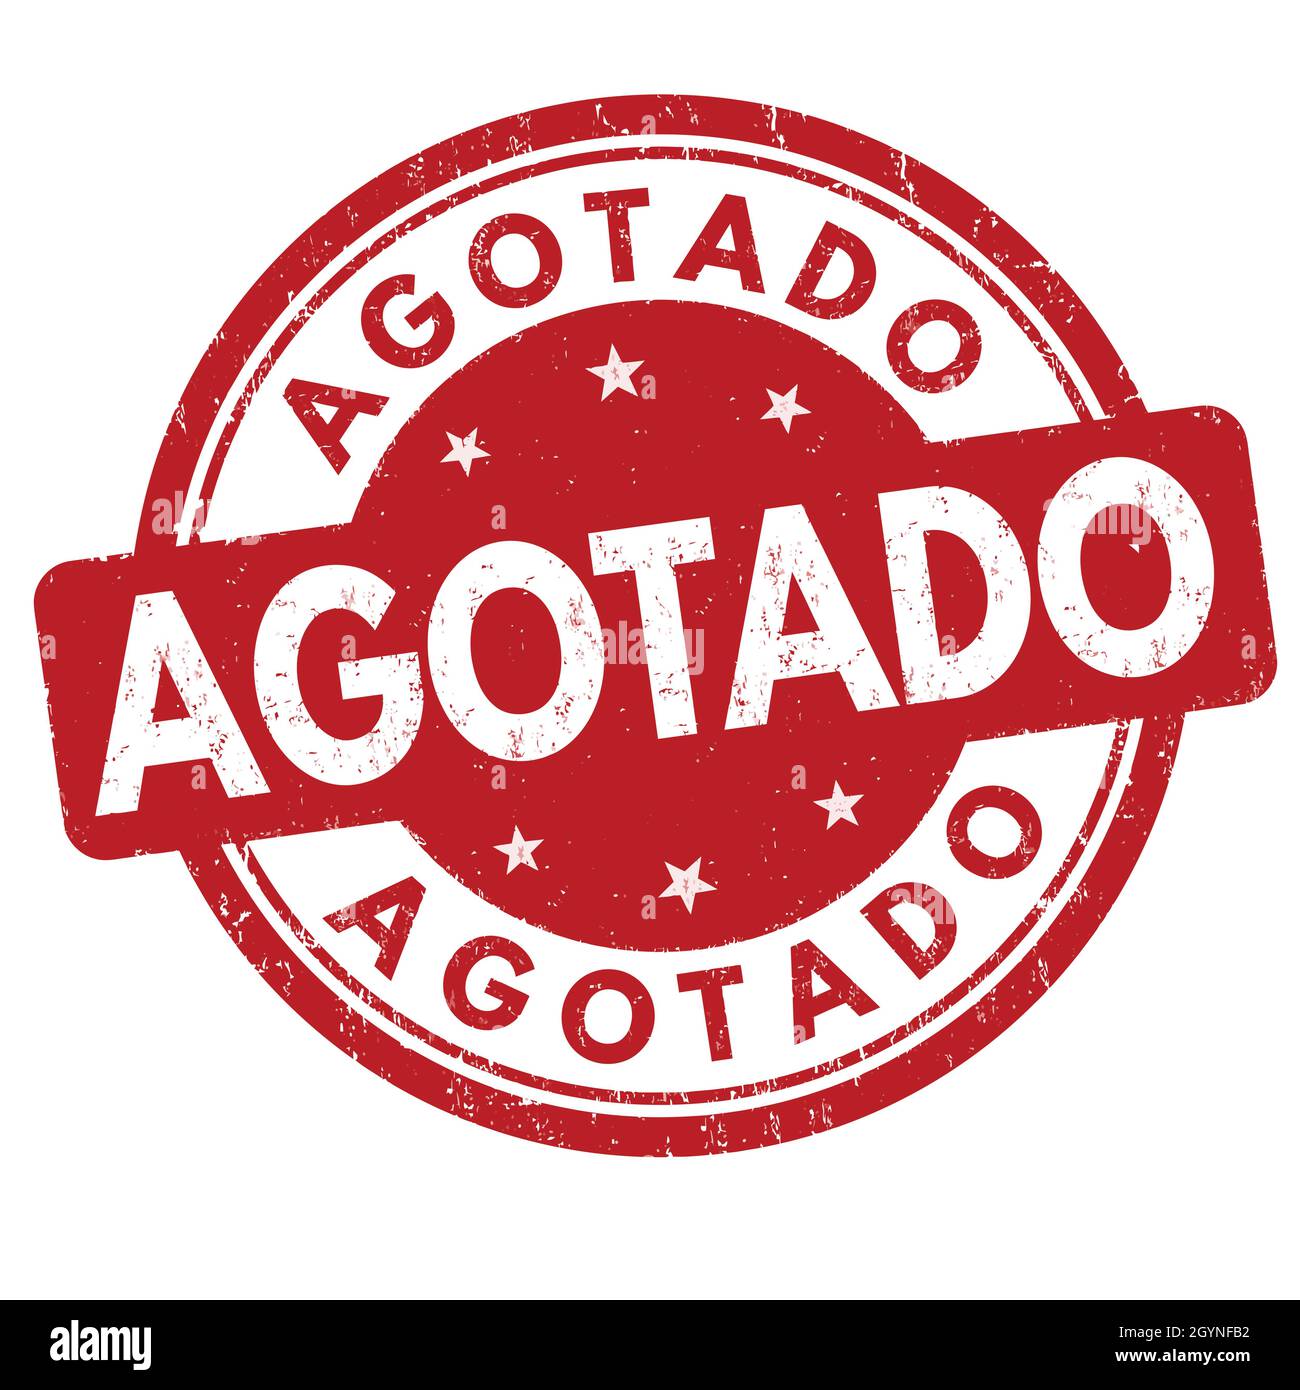 Out of stock ( agotado - in spanish language ) grunge rubber stamp on white background, vector illustration Stock Vector